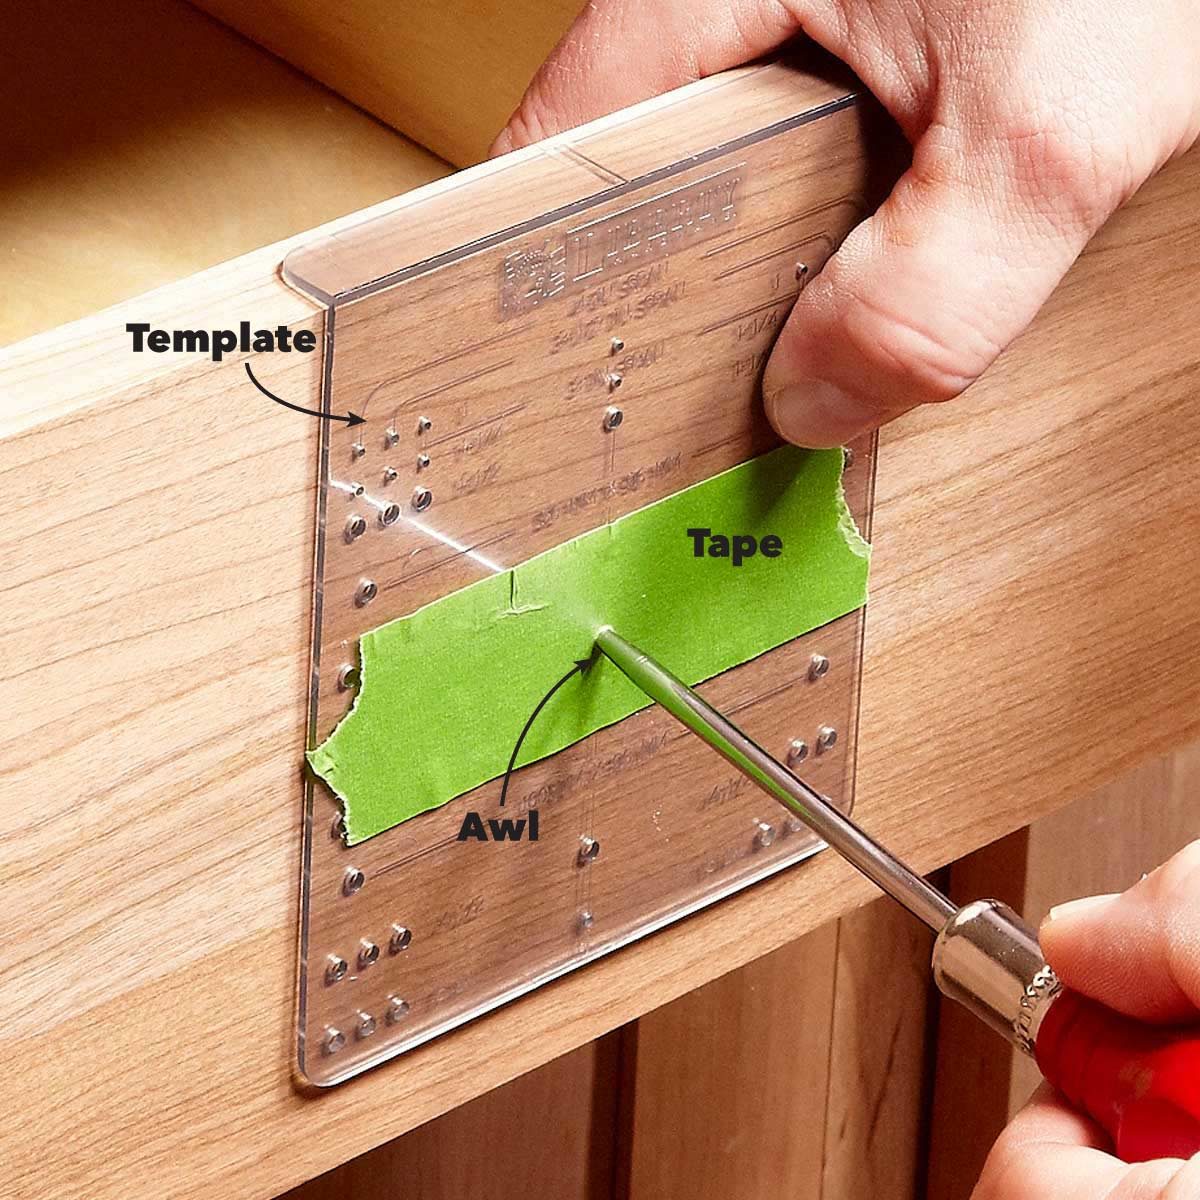 Cover Unused Holes With Tape